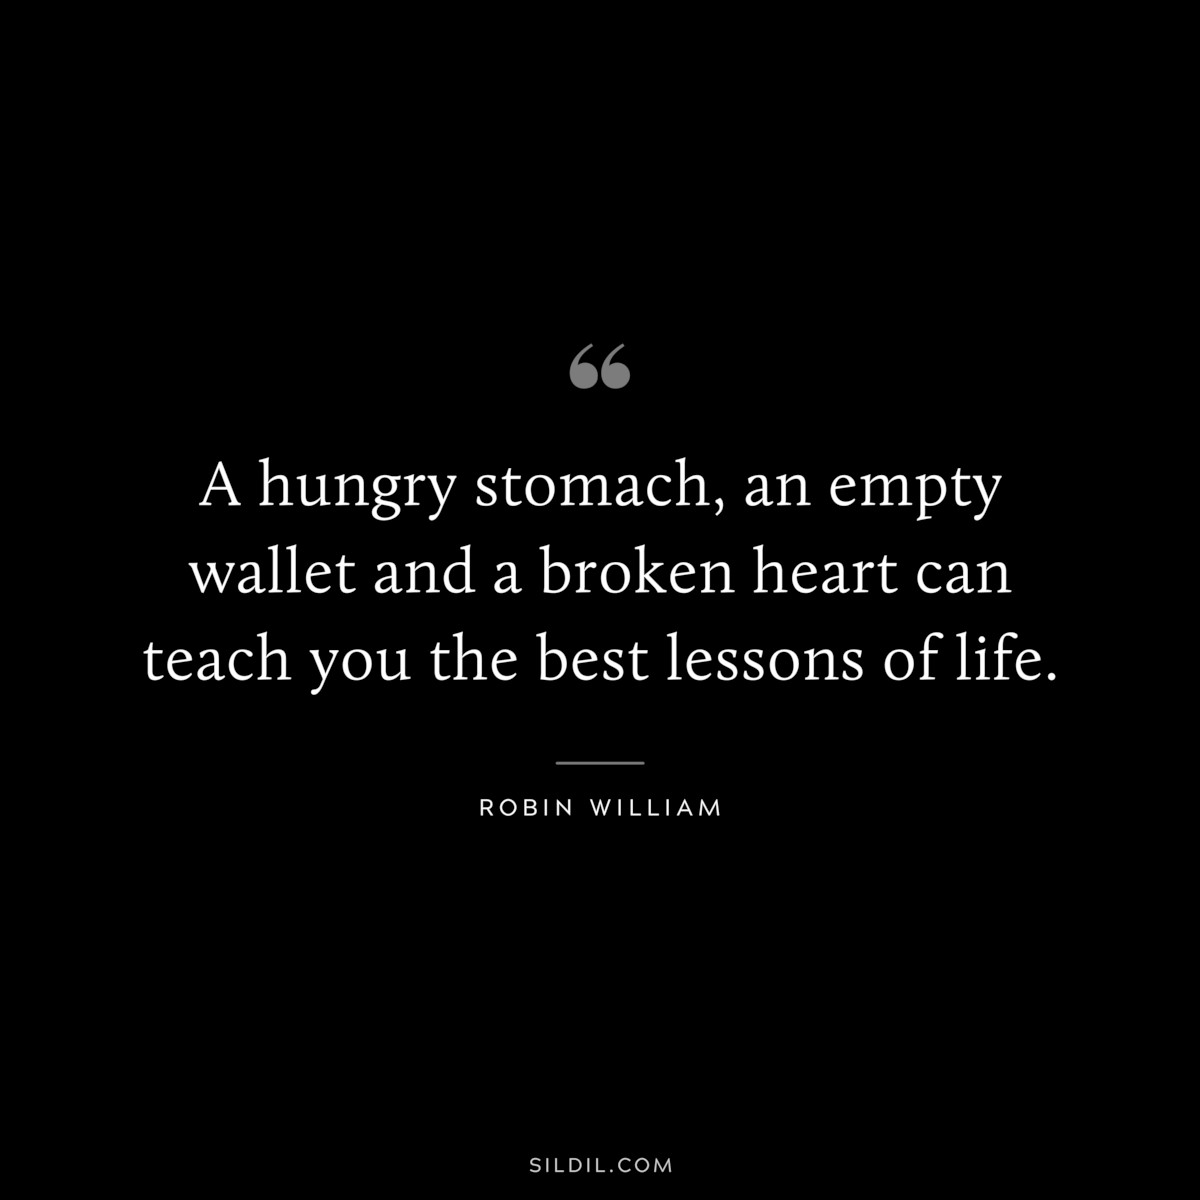 A hungry stomach, an empty wallet and a broken heart can teach you the best lessons of life. ― Robin William